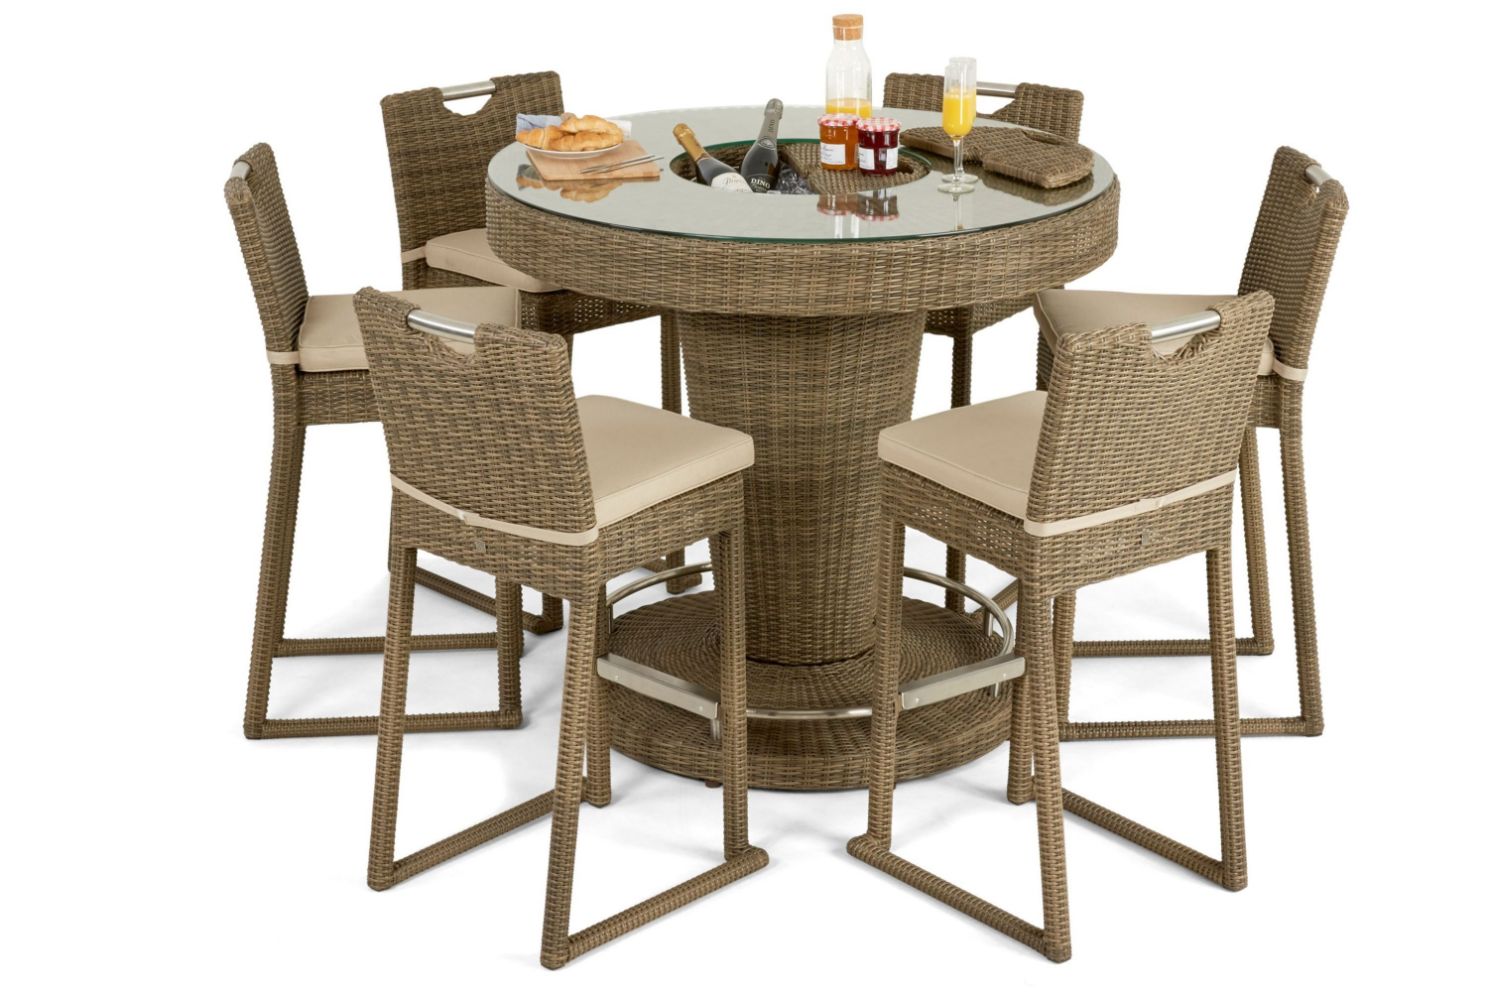 Brand New Rattan Garden Furniture: Exclusive Range Including Dining Sets, Sofa Sets & Patio Heaters